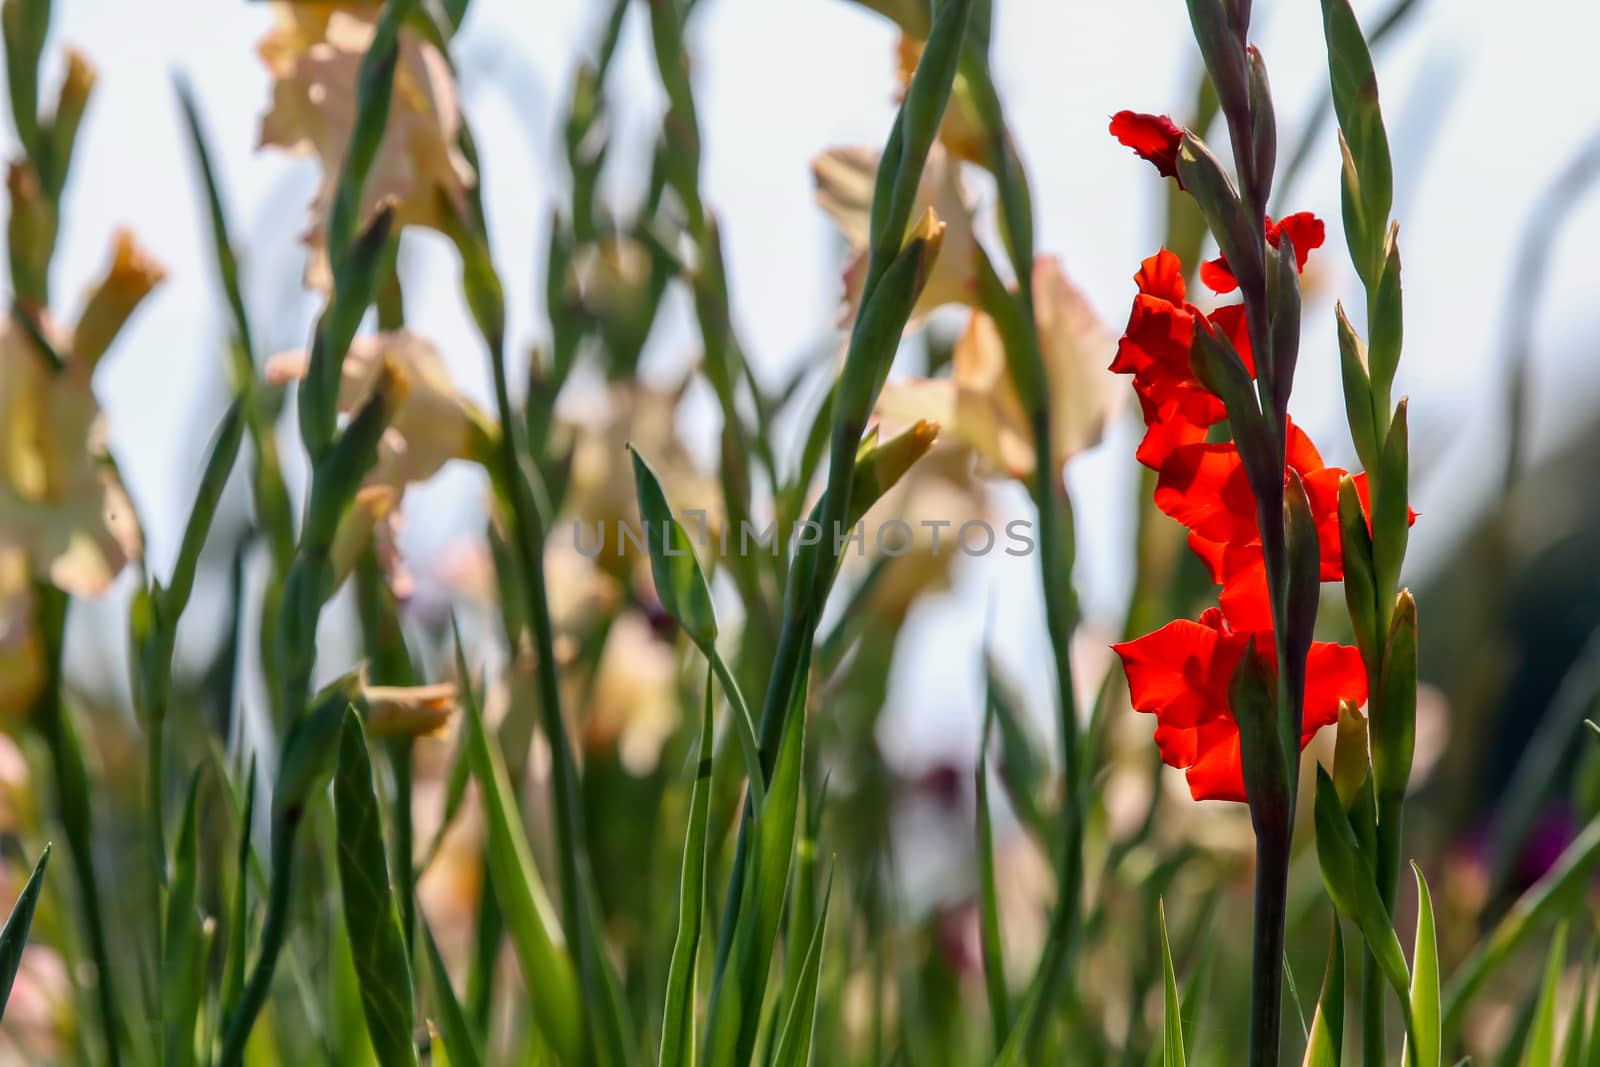 Red and gentle pink gladiolus flowers blooming in beautiful garden. Gladiolus is plant of the iris family, with sword-shaped leaves and spikes of brightly colored flowers, popular in gardens and as a cut flower.

